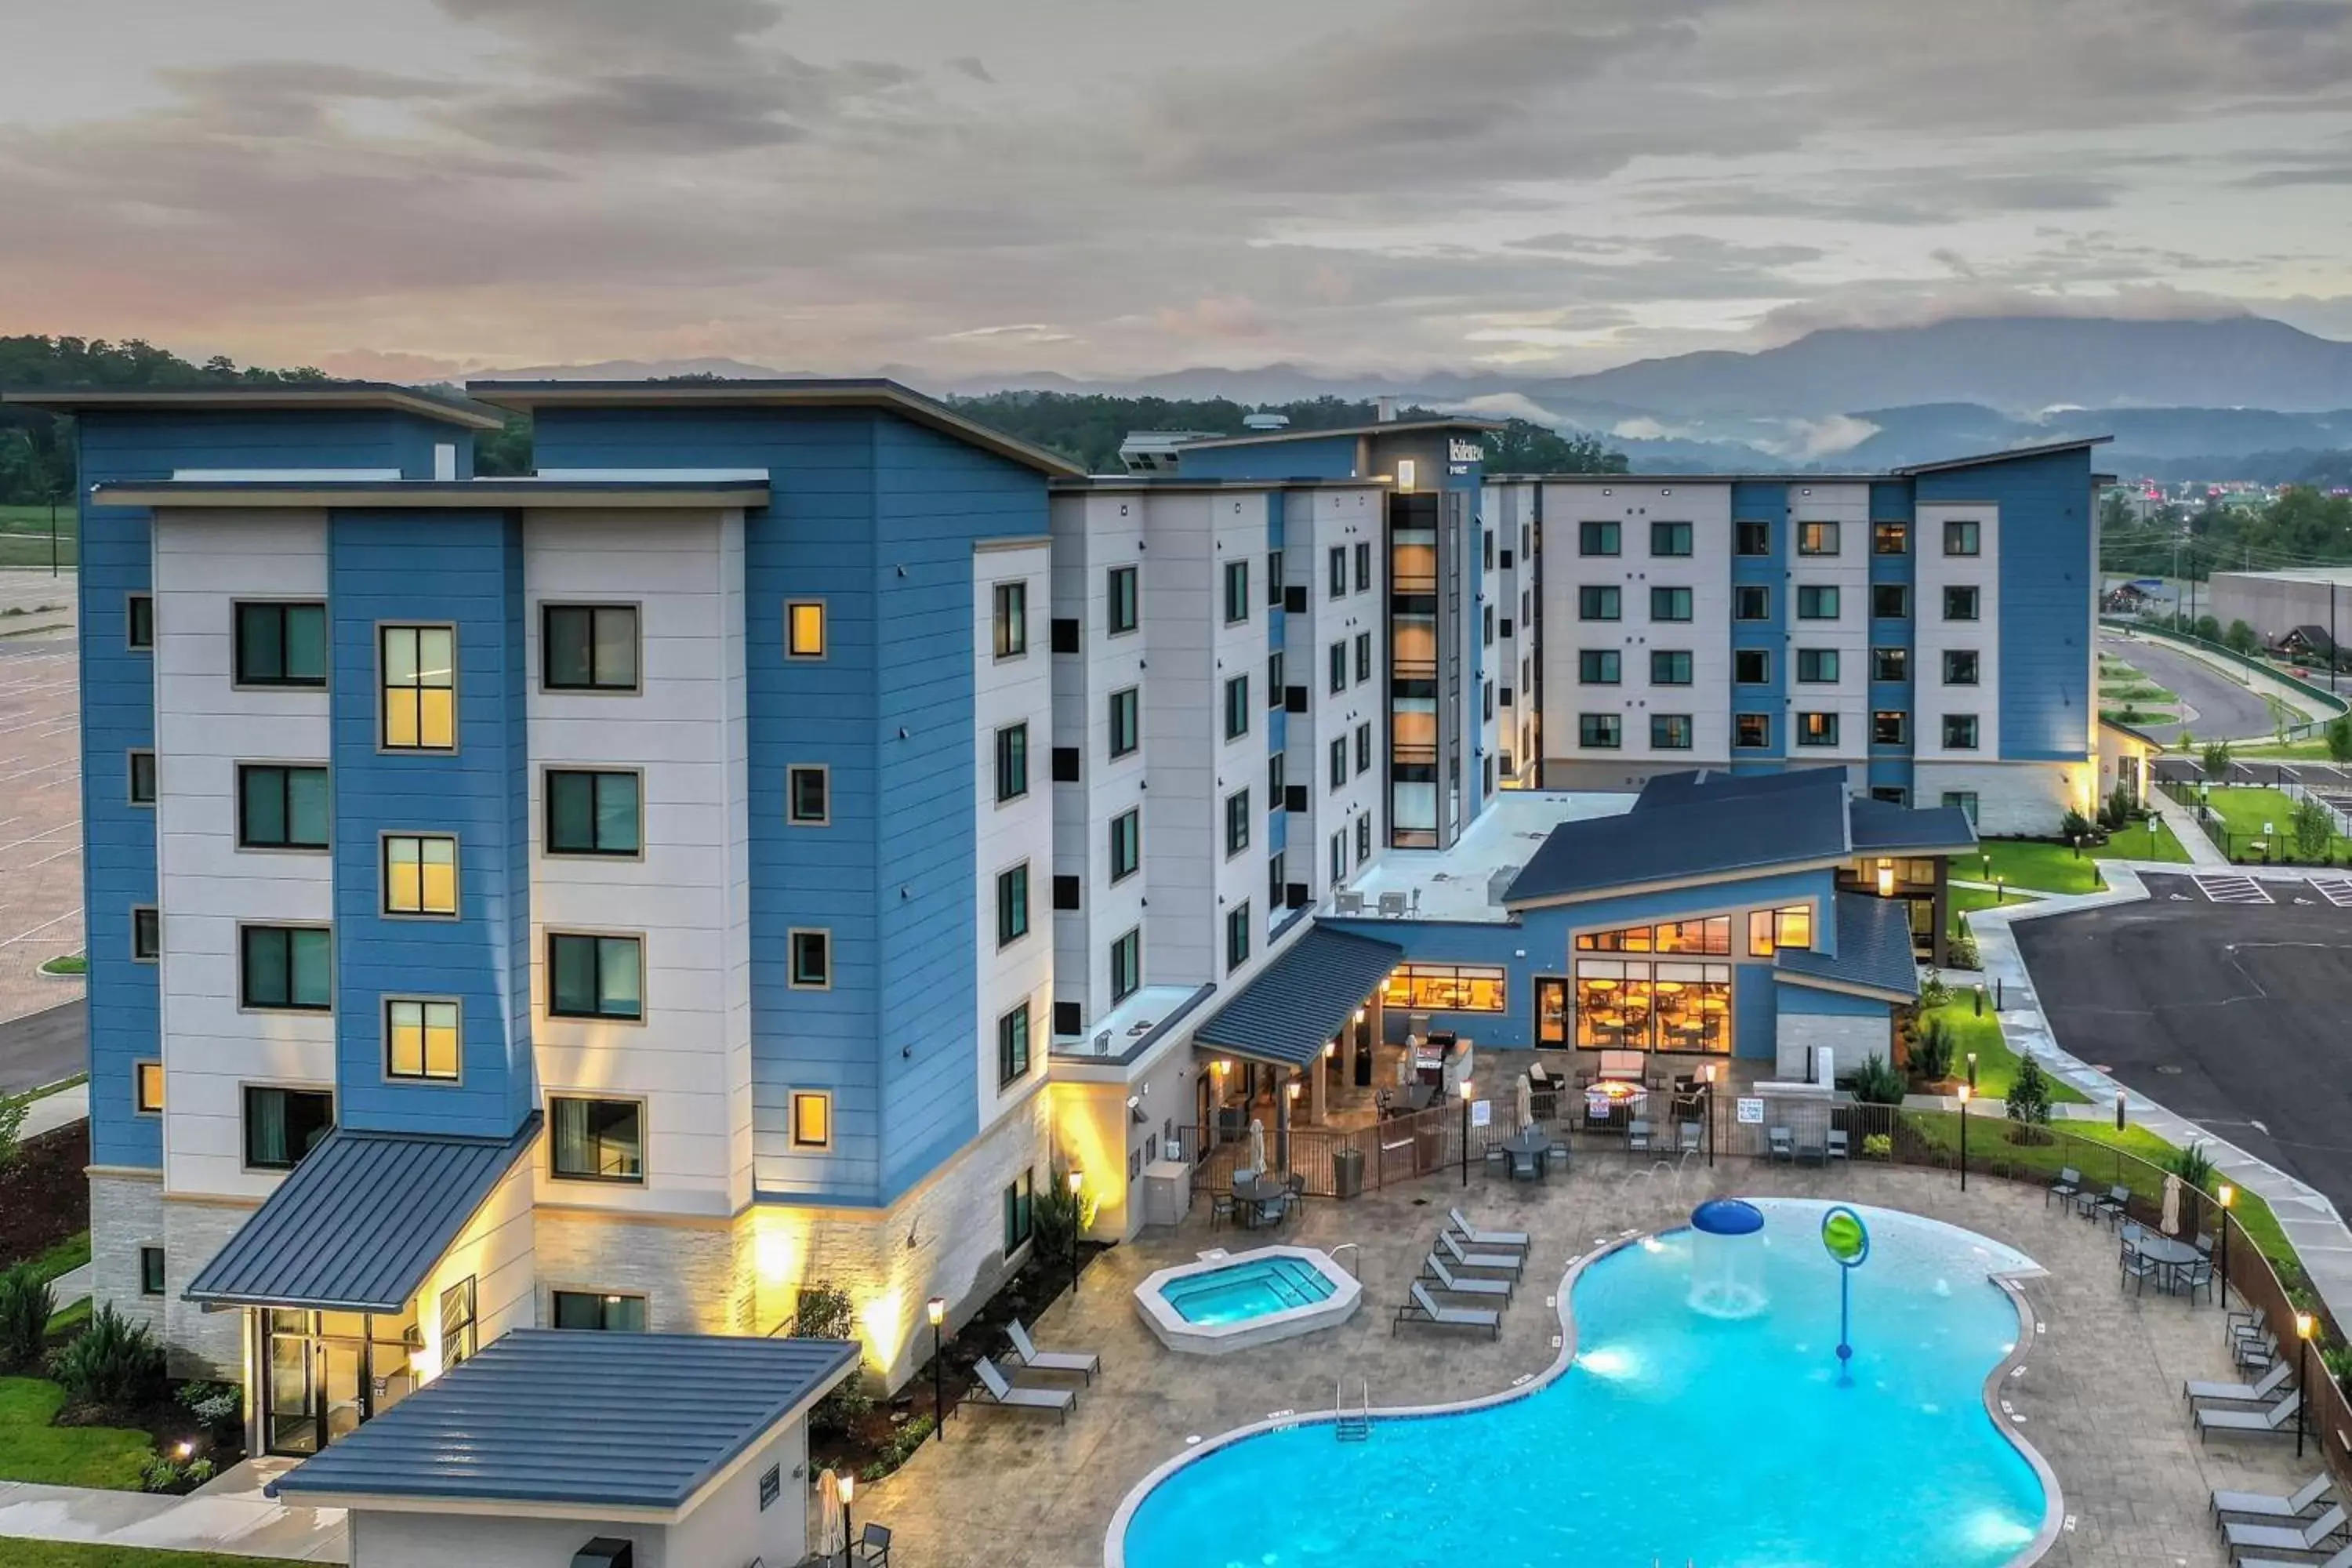 Property building, Pool View in Residence Inn by Marriott Pigeon Forge